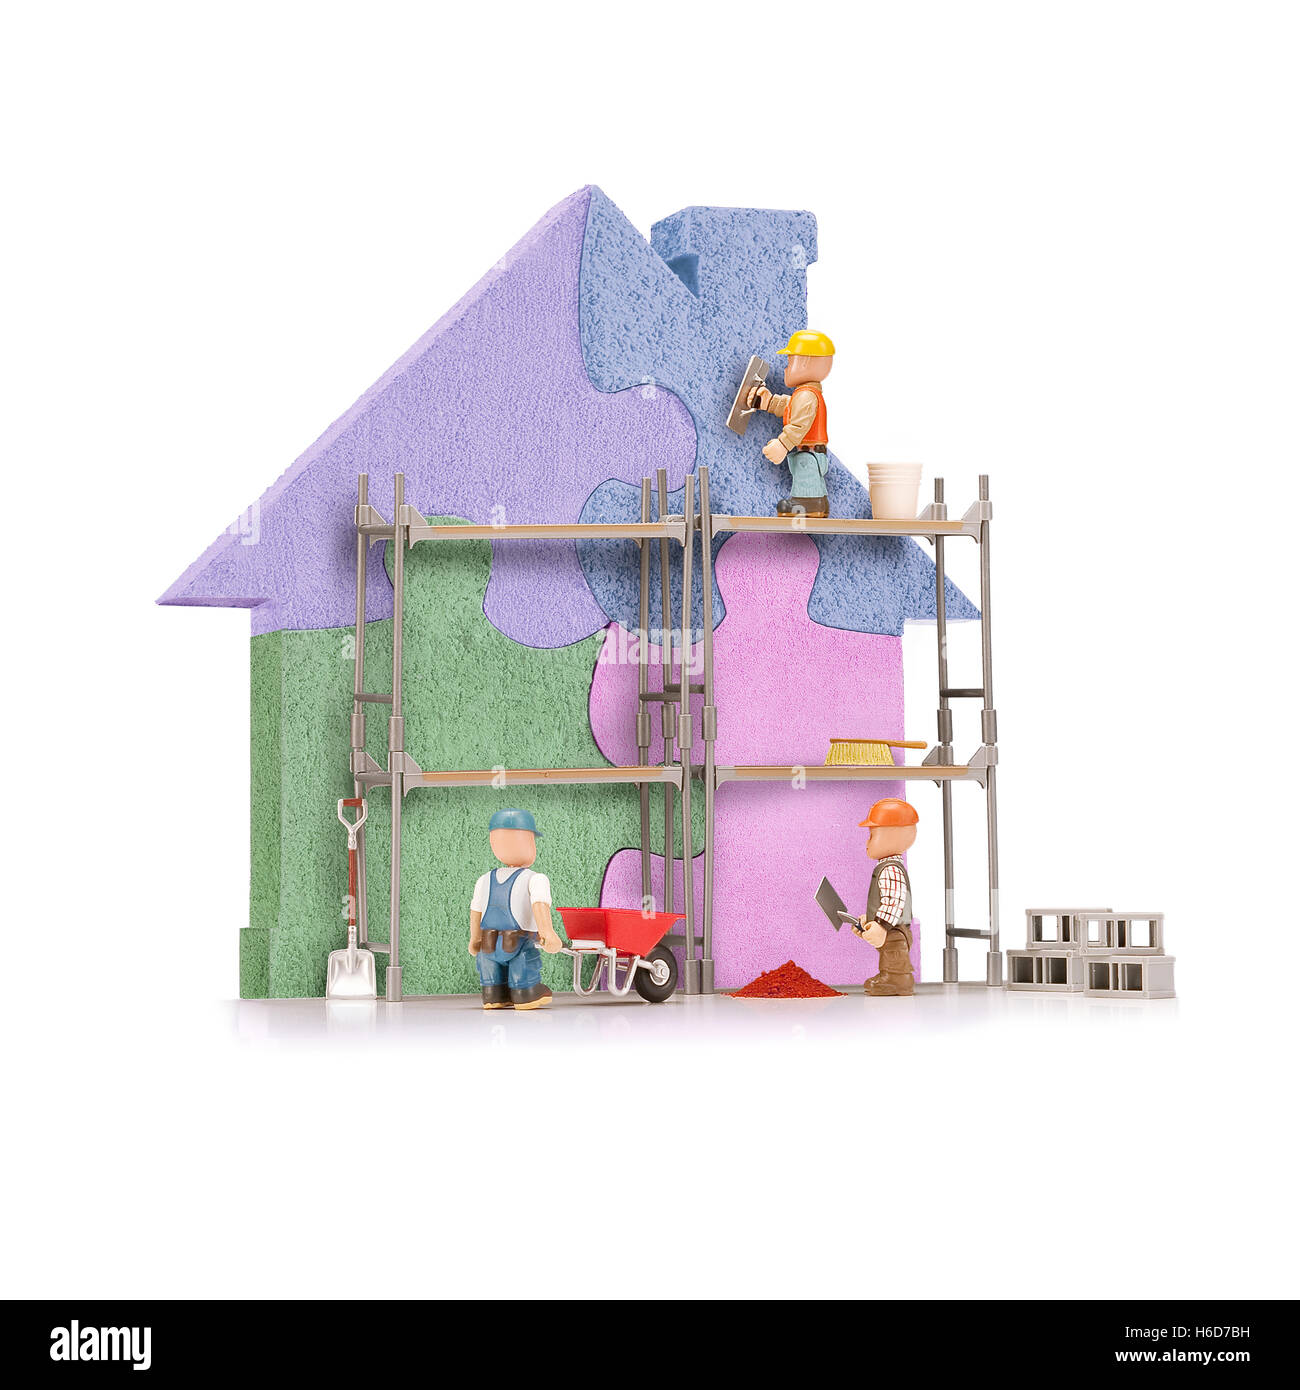 Puppets build a colorful puzzle house, isolated on white. Stock Photo